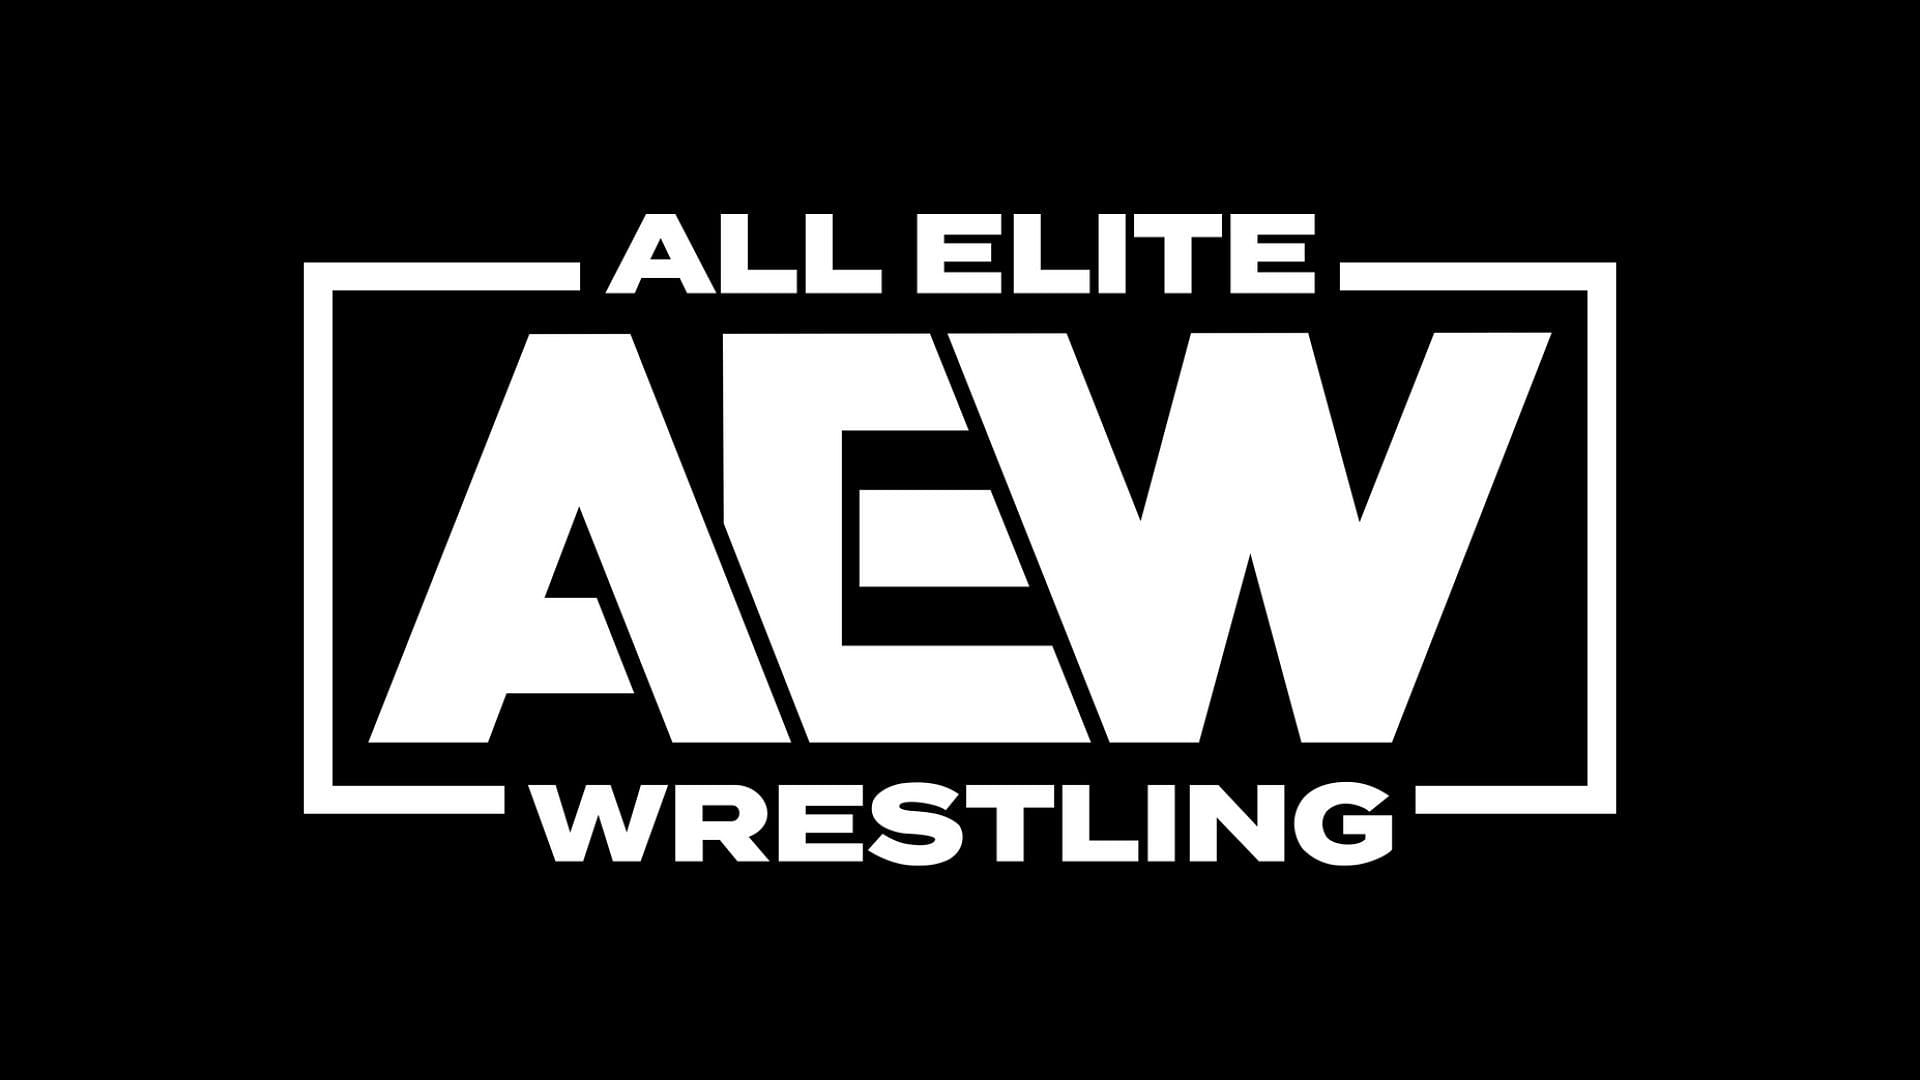 Should this AEw star not have had this massive victory?